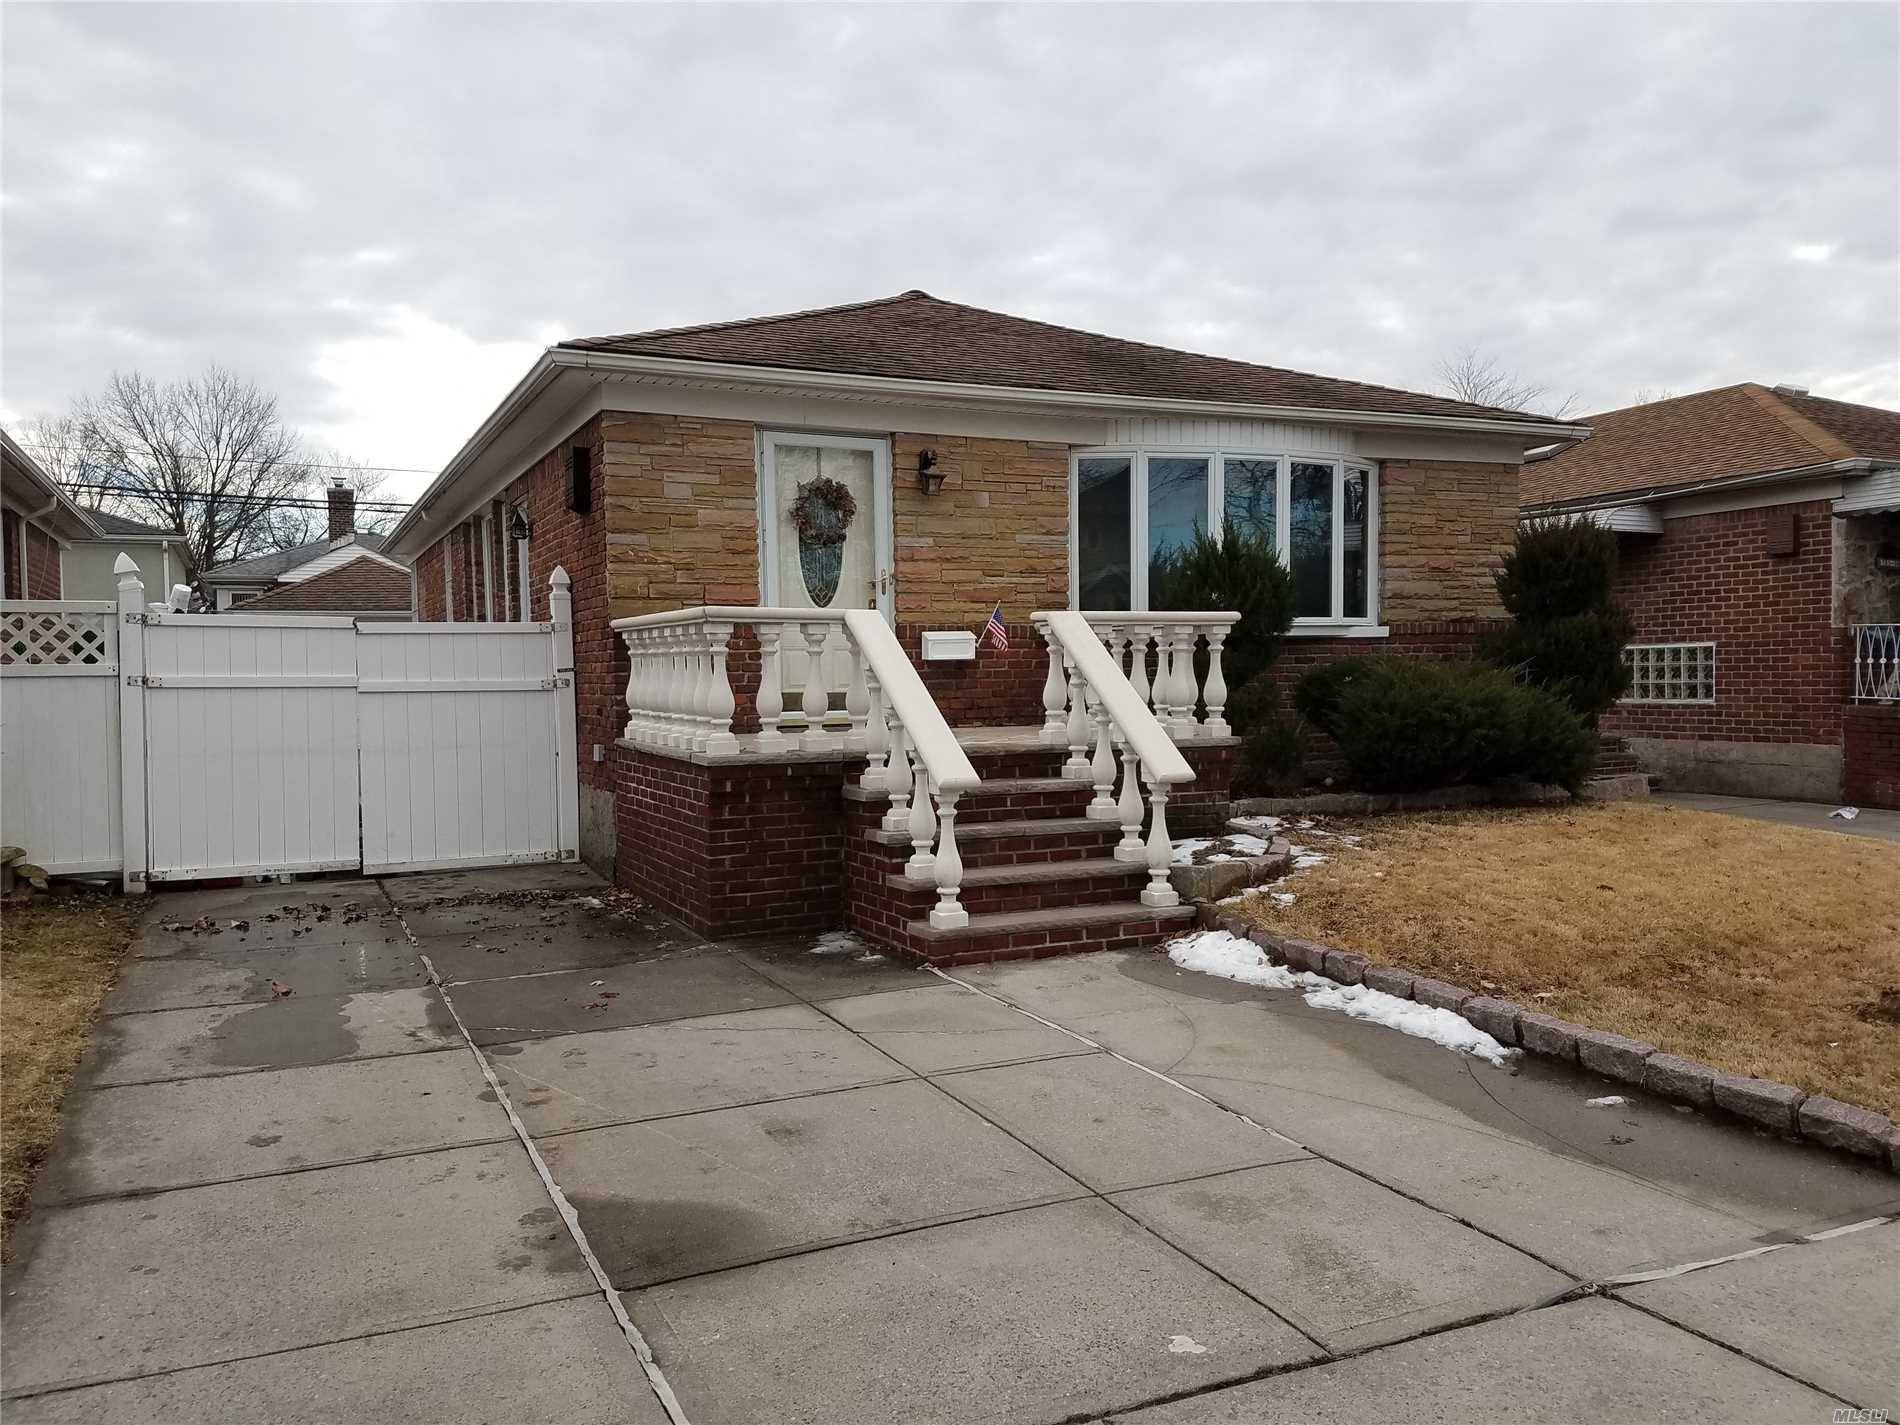 Totally Renovated Three Bedroom Two Bathroom Brick Ranch Home Zone R2A In The Most Desirable Convenient To Everything Flushing Area, Cherry Wood Kitchen Cabinets, Granite Countertops, Sliding Door To Private ...